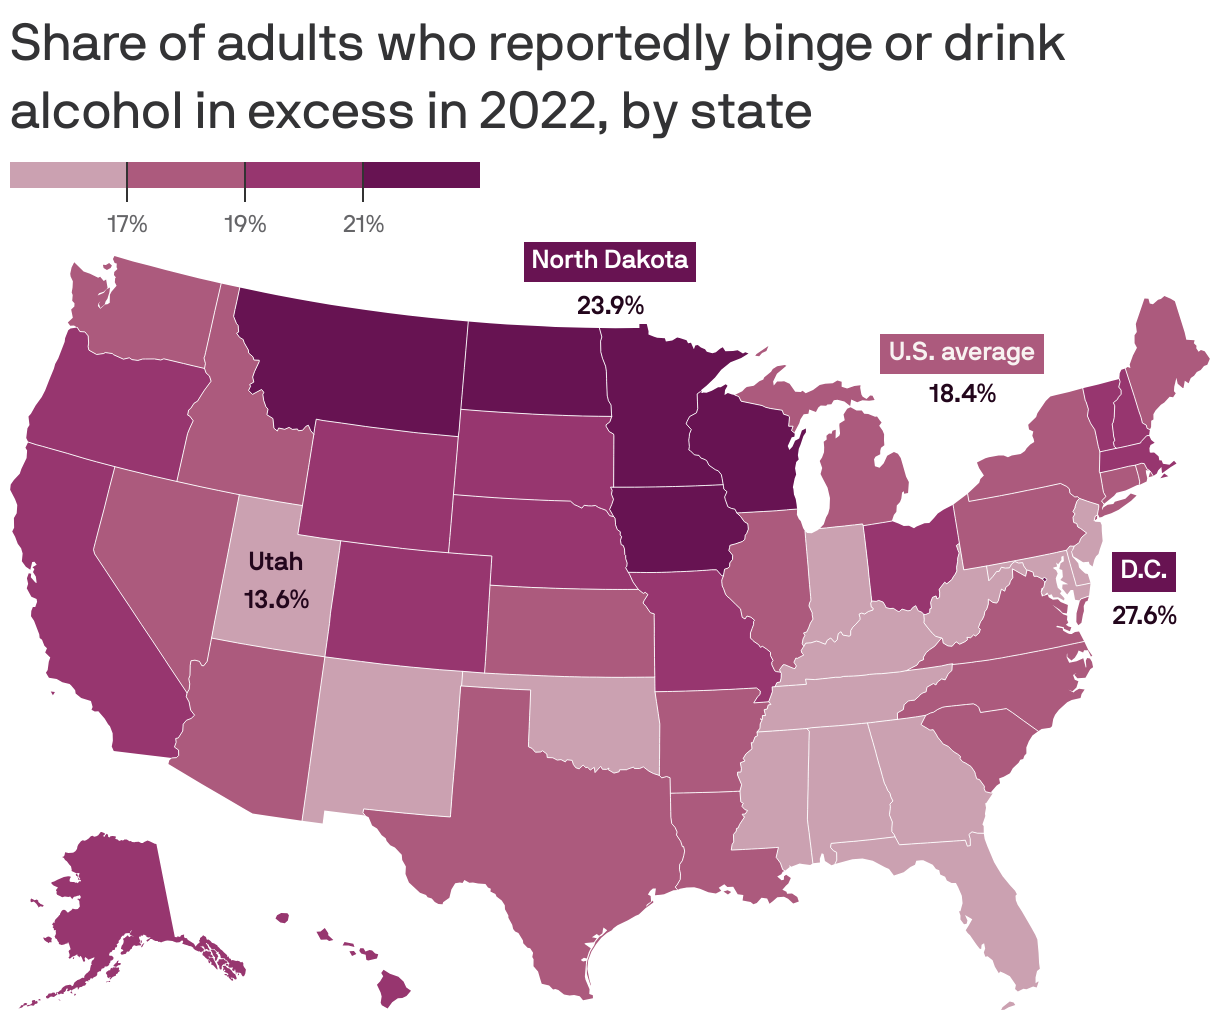 Share of adults who reportedly binge or drink alcohol in excess in 2022, by state